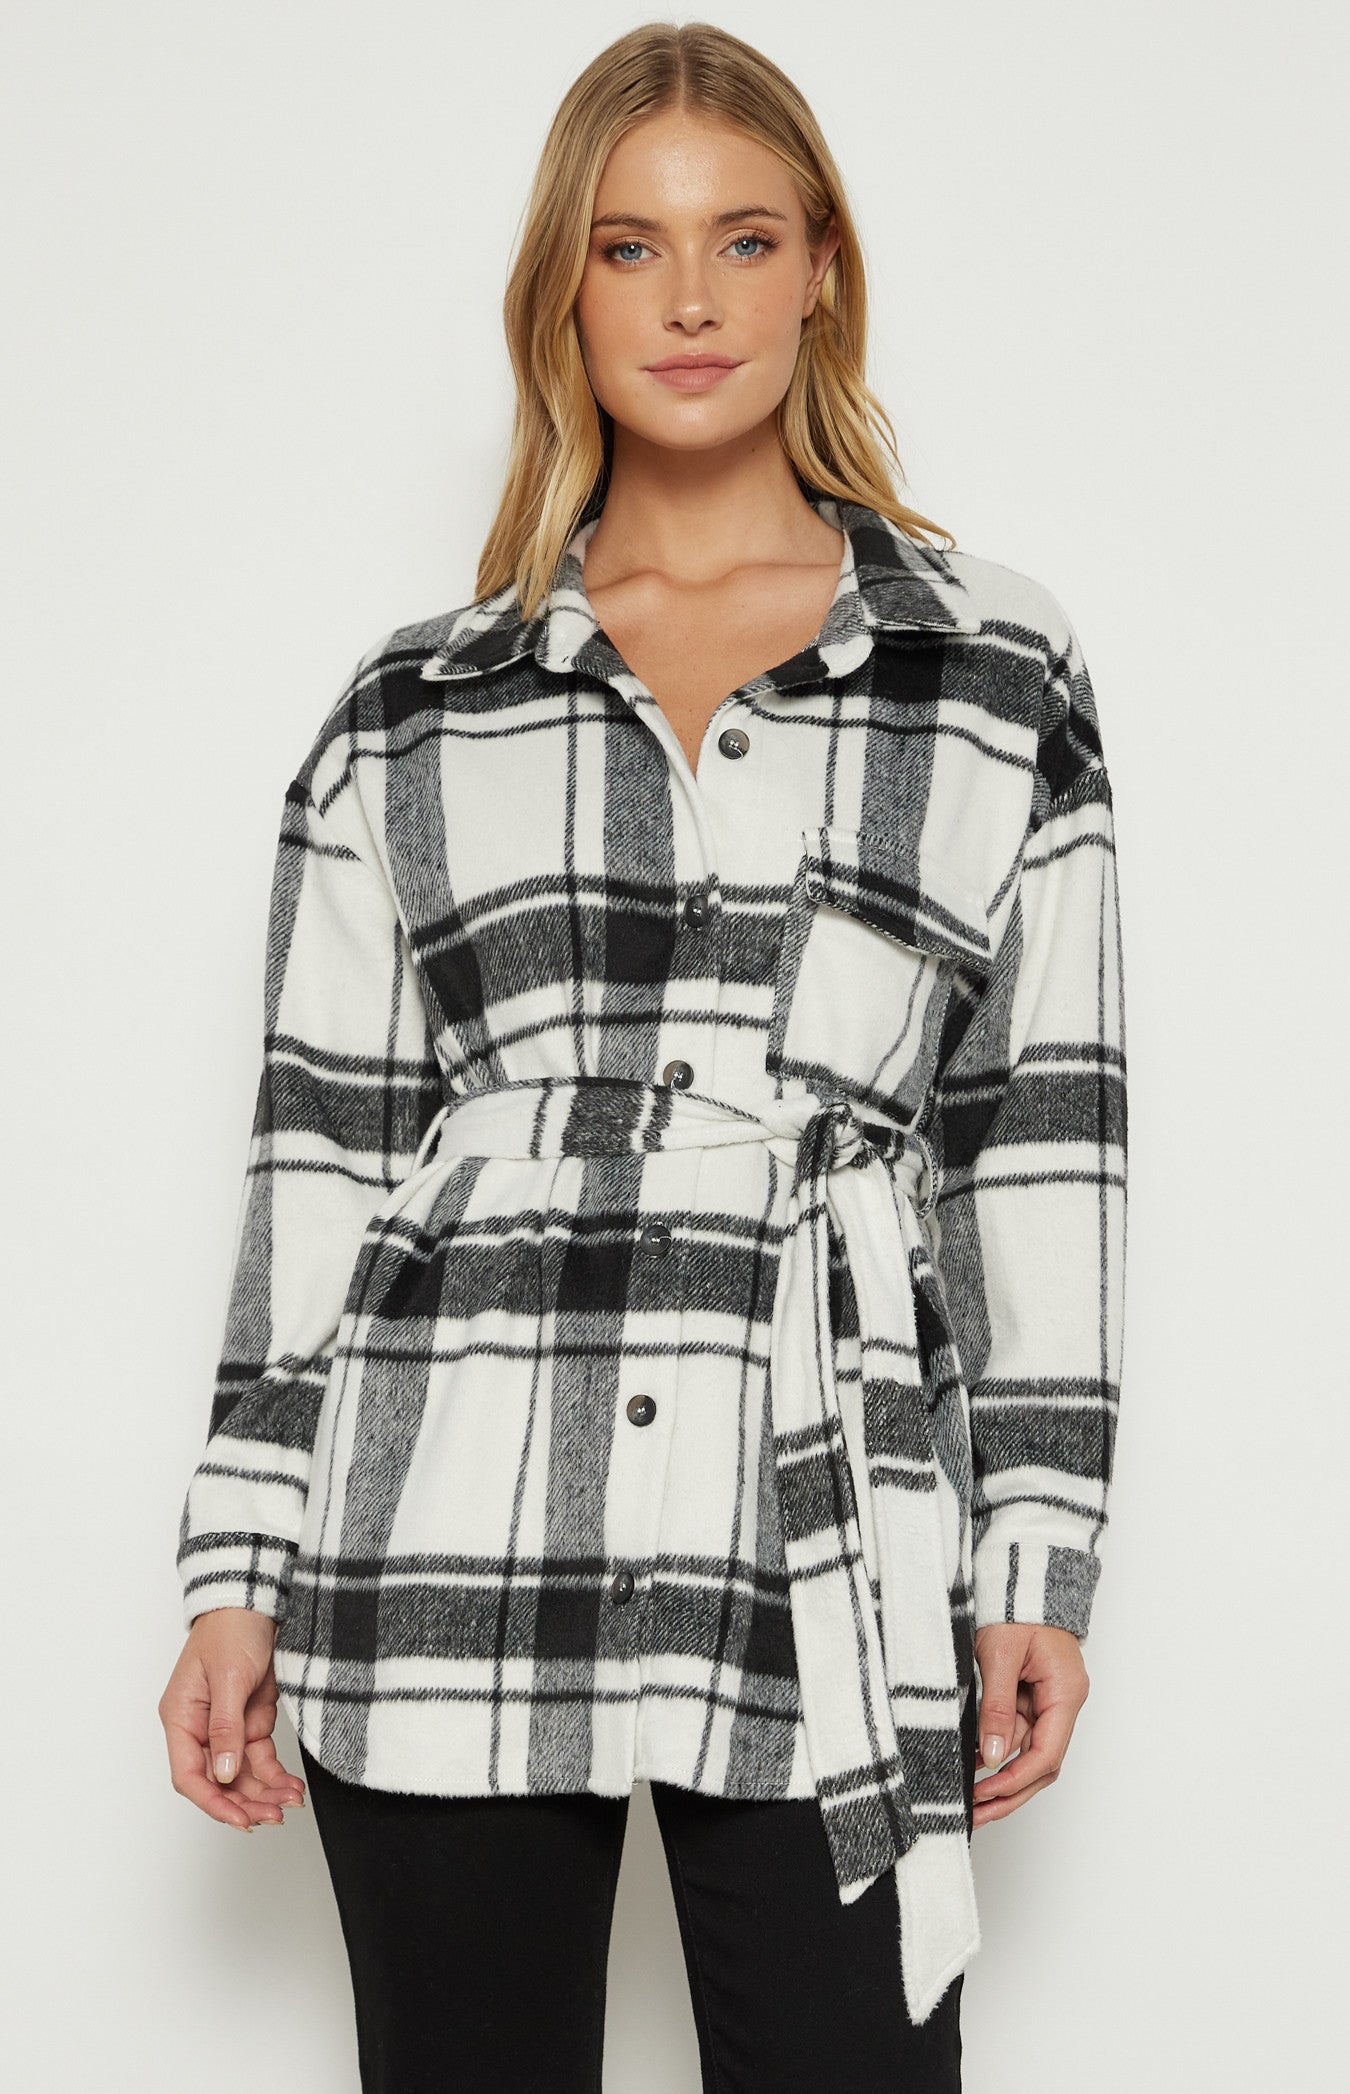 SOGNA COL Checkered Button up Jacket with Belt WJT210-2A